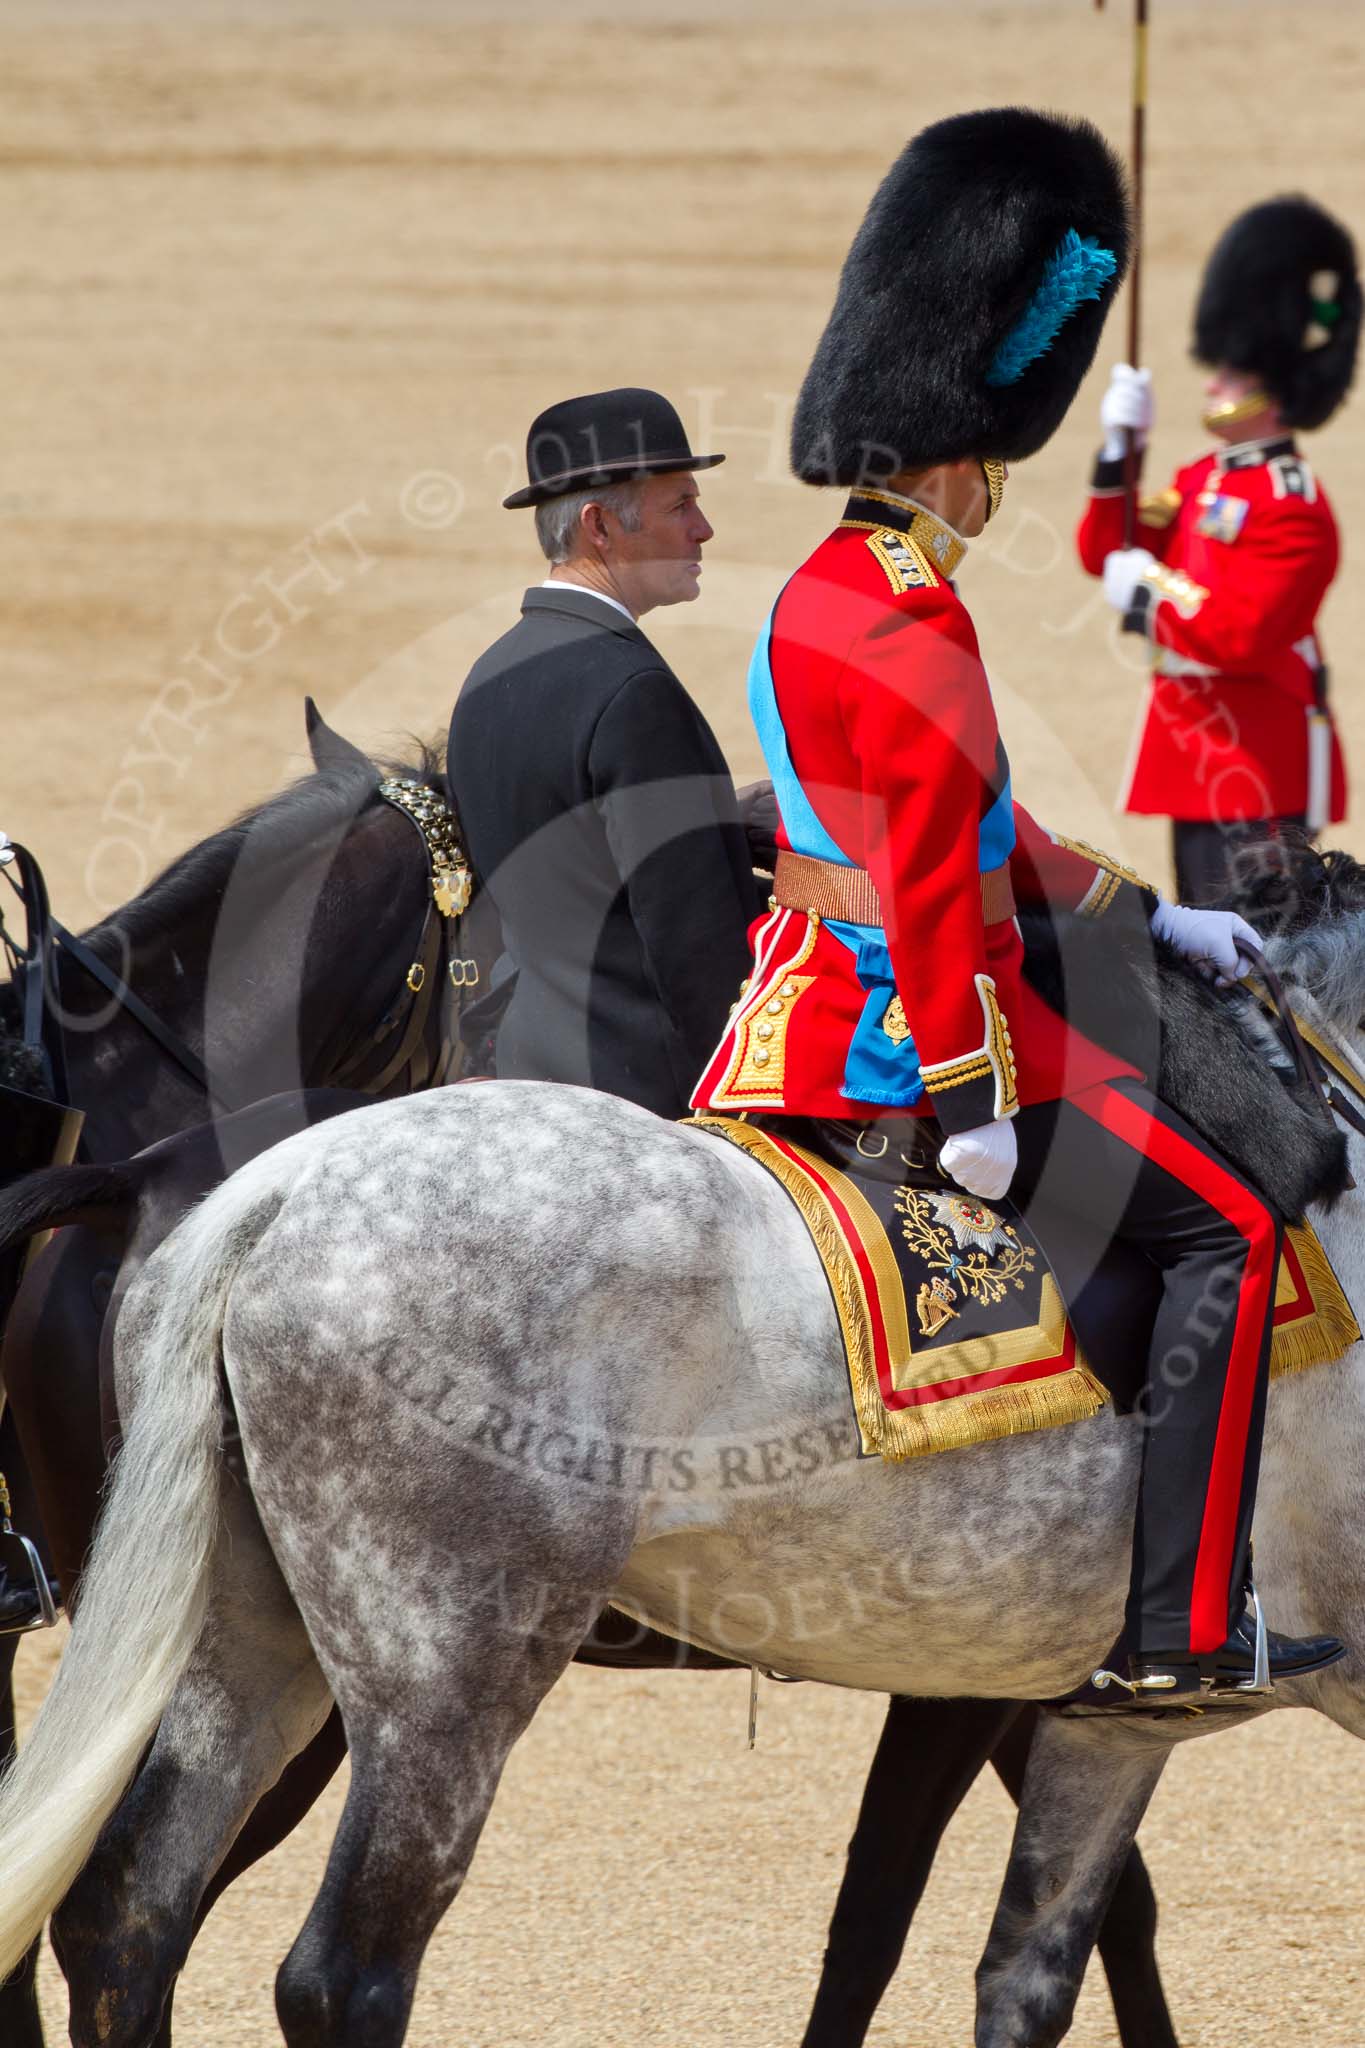 The Colonel's Review 2011: Marching Off - HRH Prince William, The Duke of Cambridge, and the Queen's Stud Groom, who rides in place of the Prince of Wales at this Colonel's Review..
Horse Guards Parade, Westminster,
London SW1,

United Kingdom,
on 04 June 2011 at 12:07, image #292